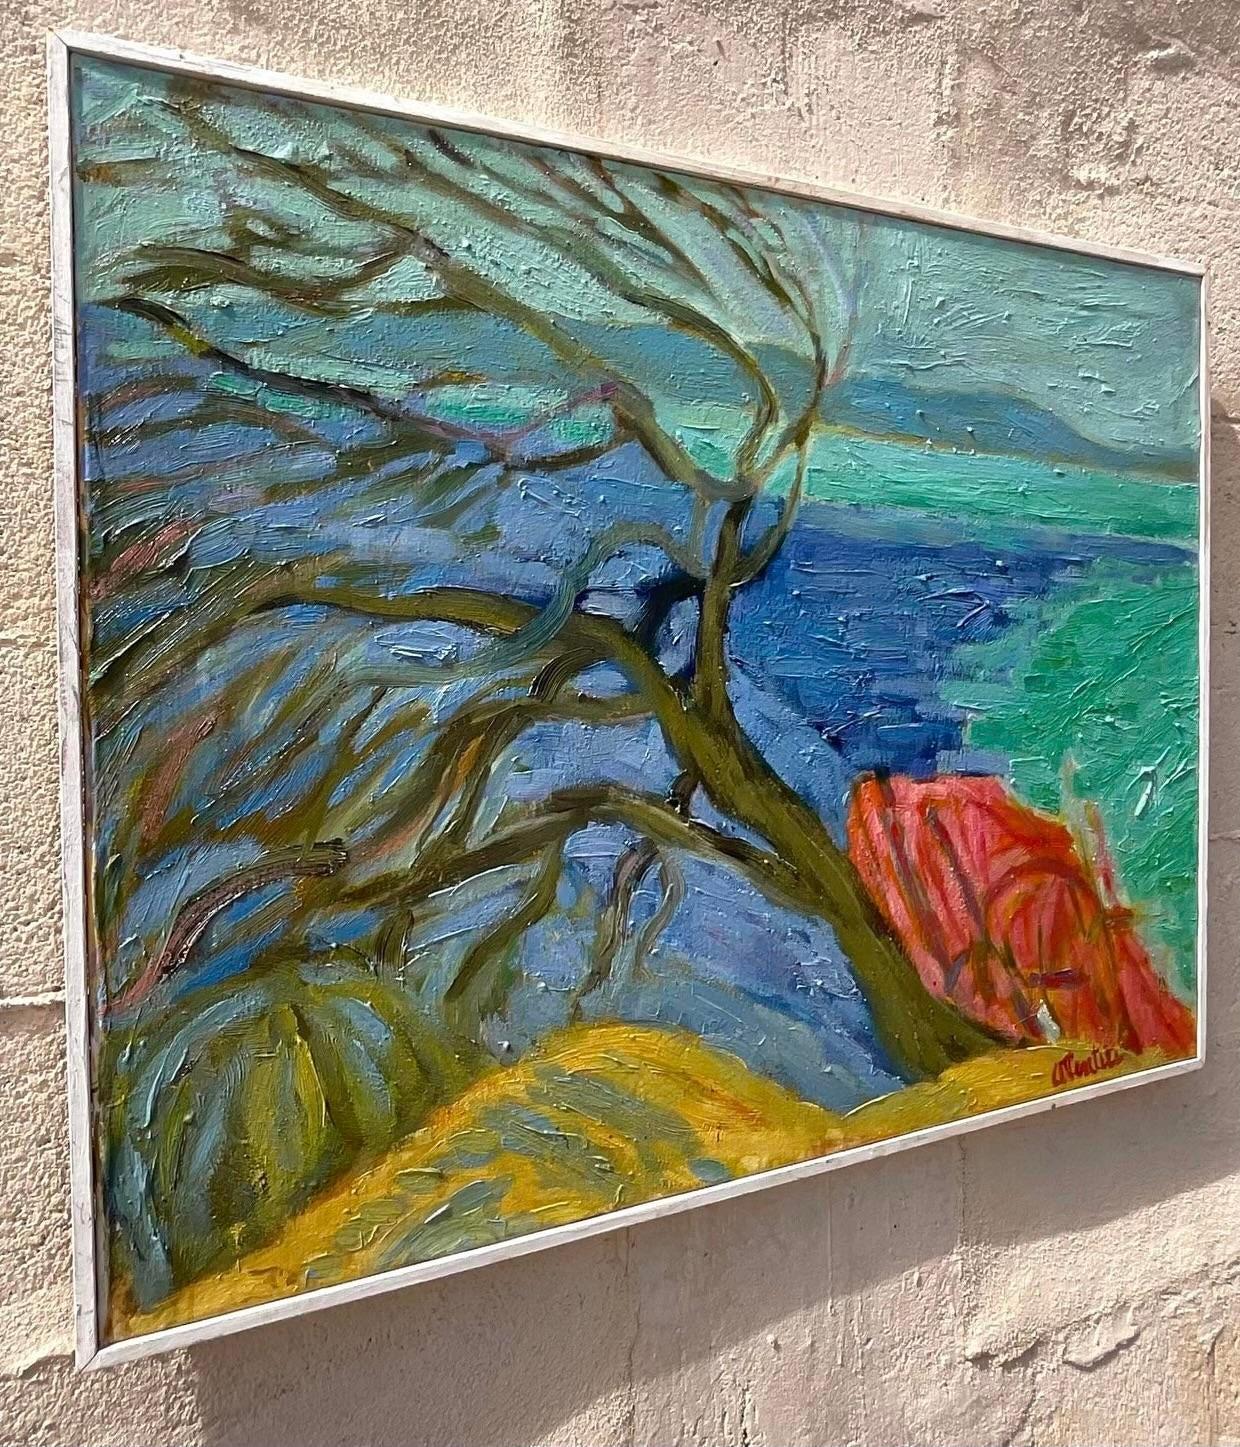 A fabulous vintage Boho original oil painting on canvas. A chic landscape composition in
a colorful Abstract Expressionist style. Signed by the artist. Acquired from a Palm Beach estate.